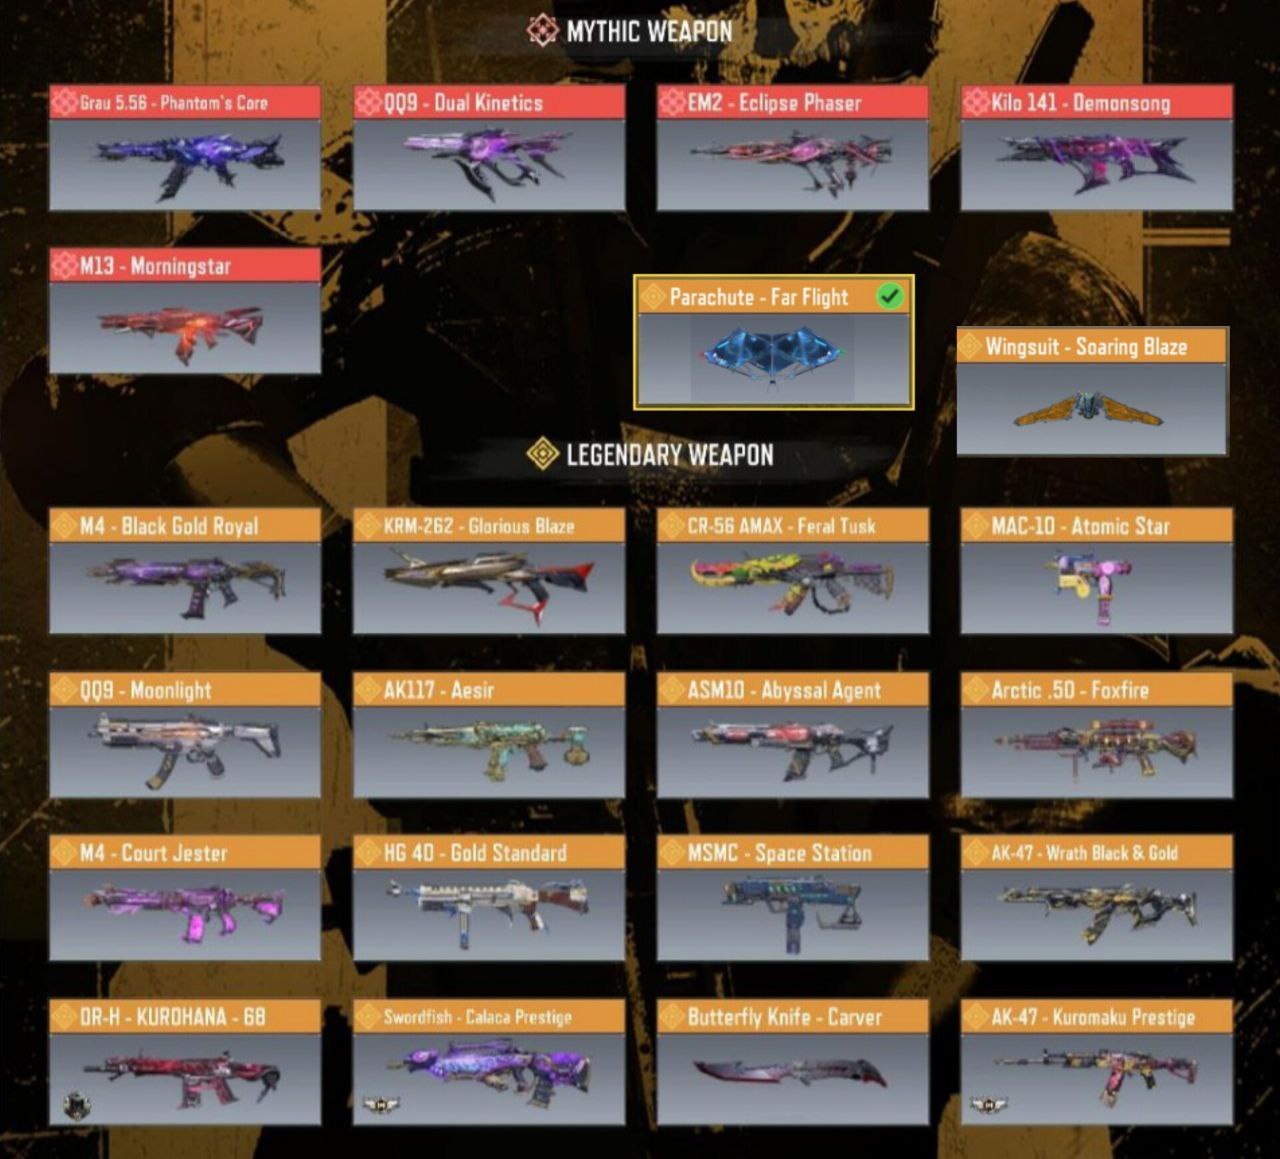 call of duty [5 matic weapons][20 legendary][with rare skins and...][more than 10 crit skins and bundles][fully guaranteed][check the account]